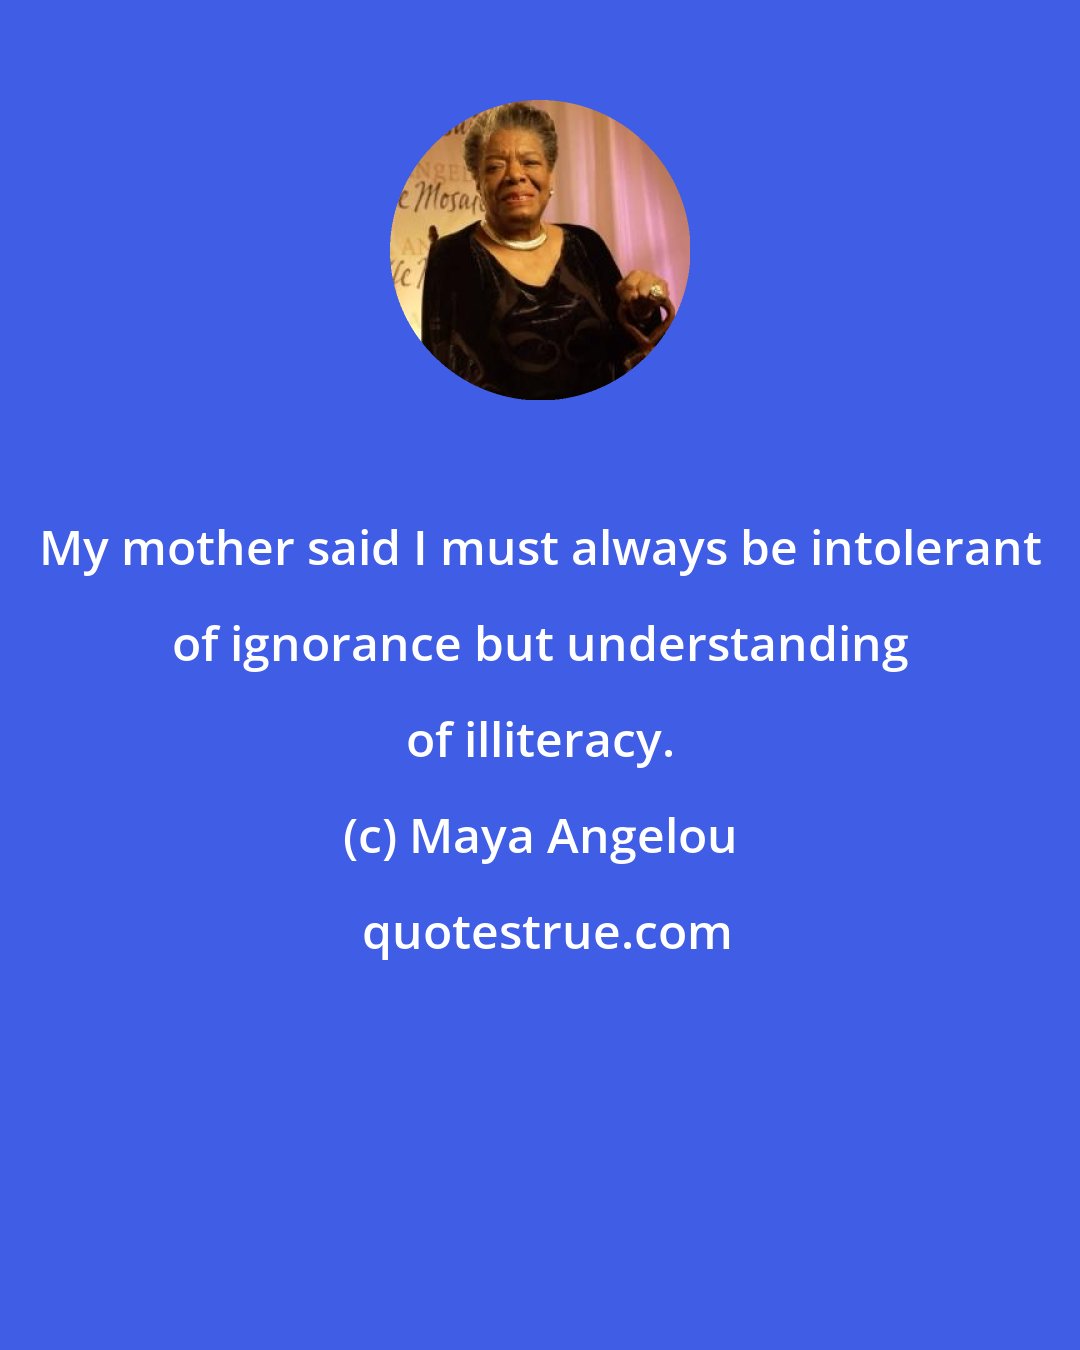 Maya Angelou: My mother said I must always be intolerant of ignorance but understanding of illiteracy.